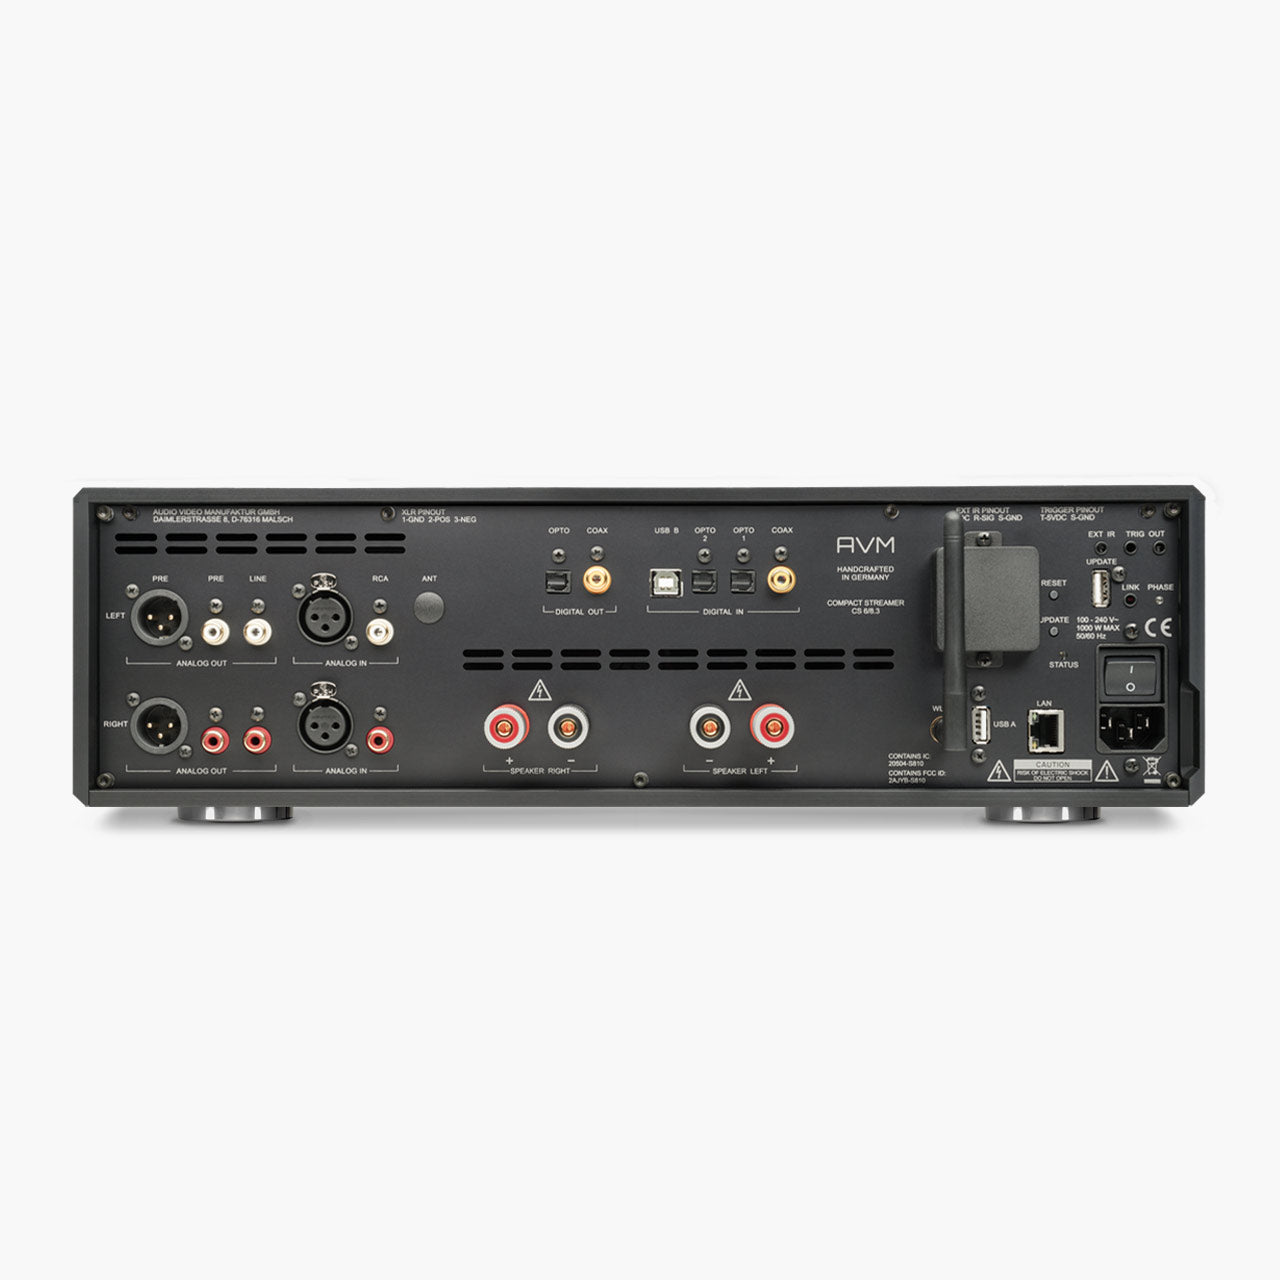 AVM OVATION CS 6.3 All In One Streaming CD Receiver